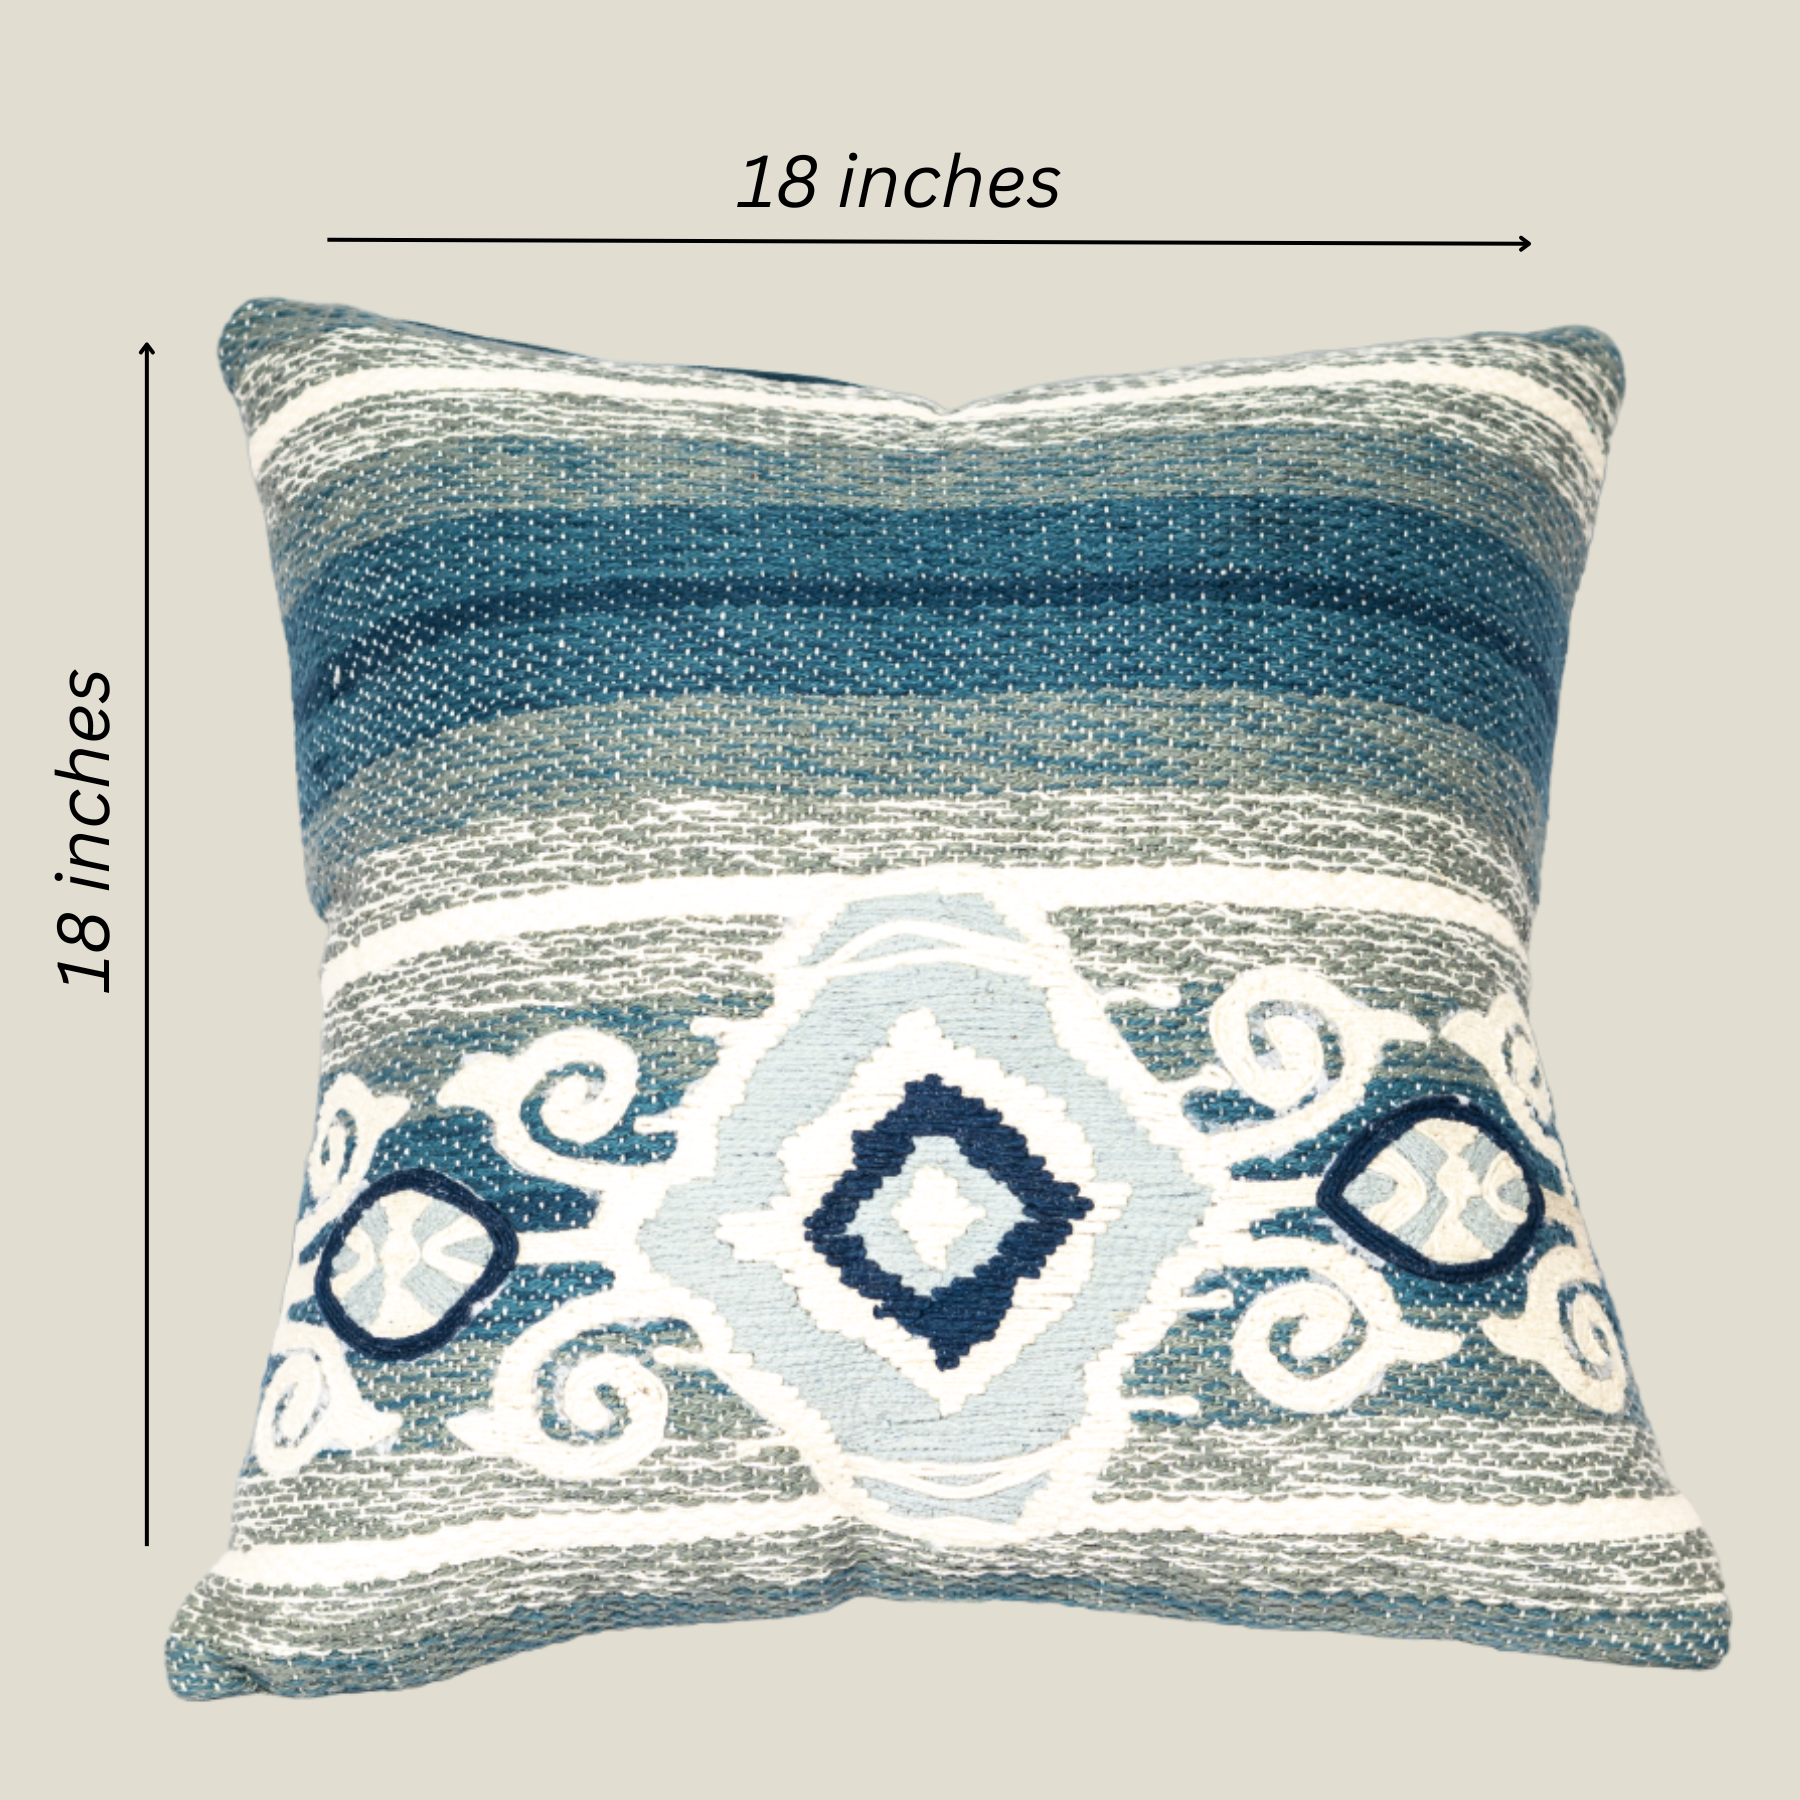 The Luxelife Blue & White Handwoven Cushion Covers